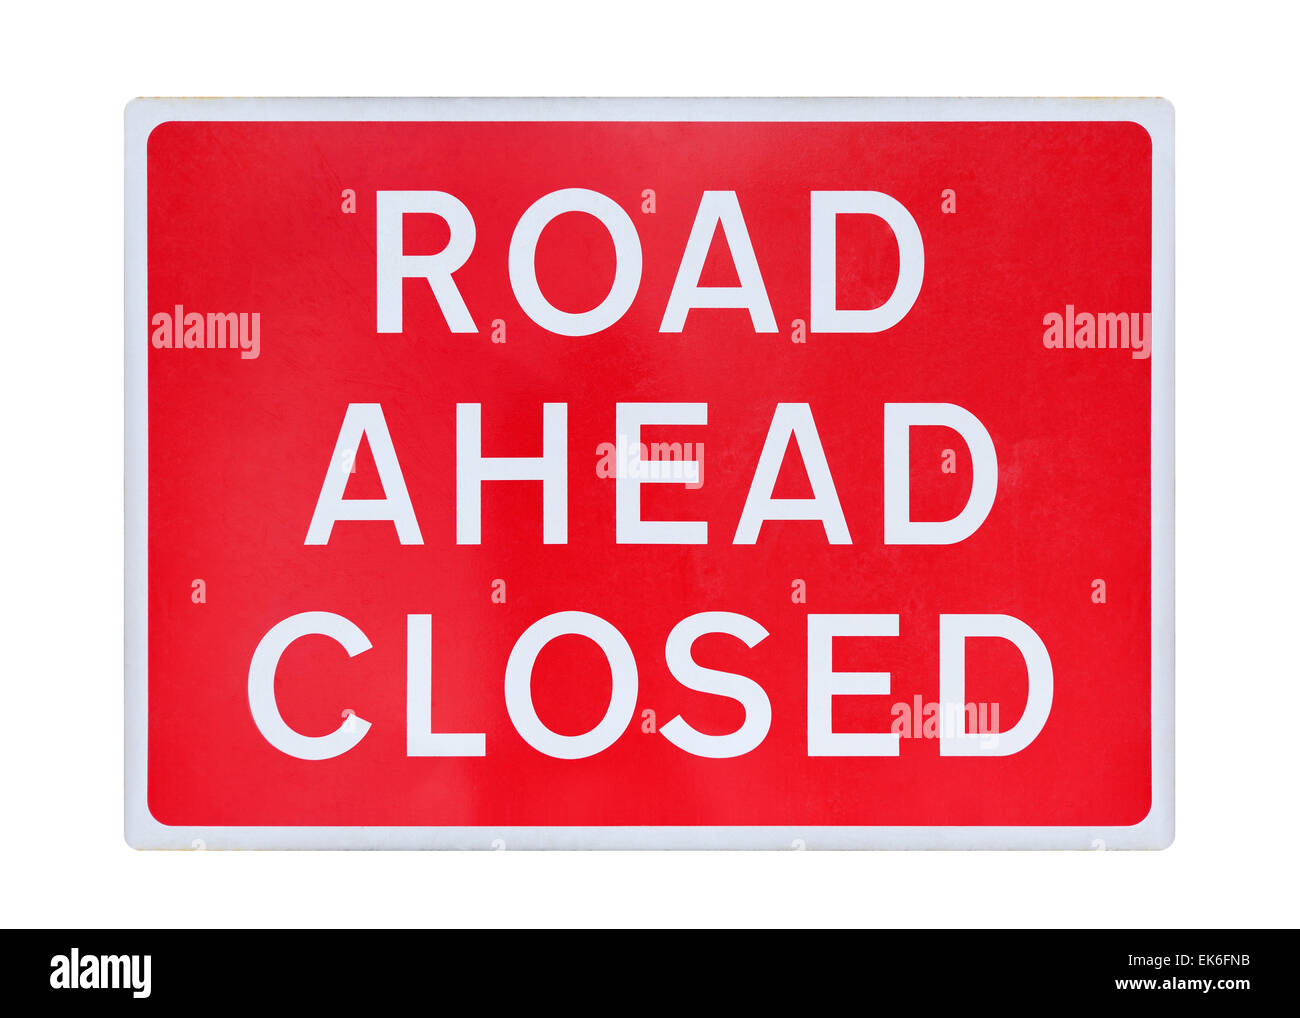 Road Ahead Closed Sign, Cut Out. Stock Photo